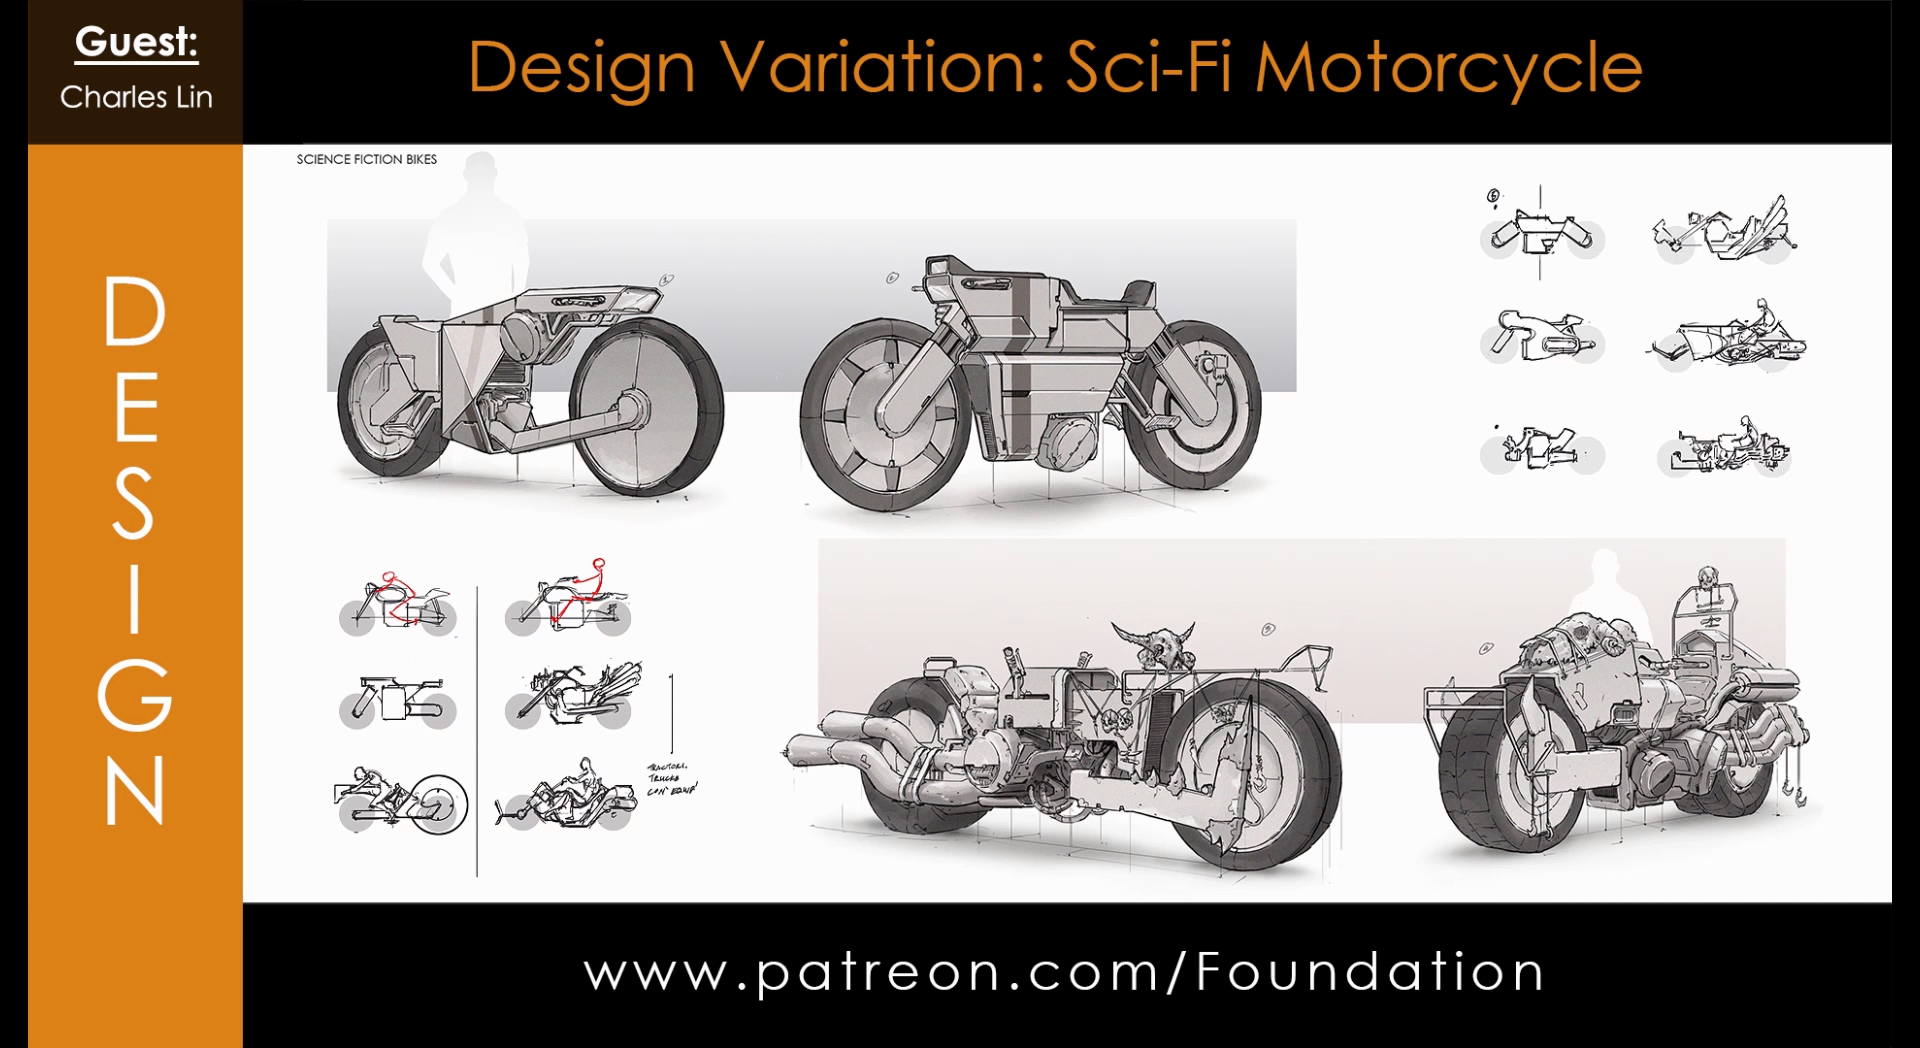 Design Variation – Sci-fi Motorcycle with Charles Lin